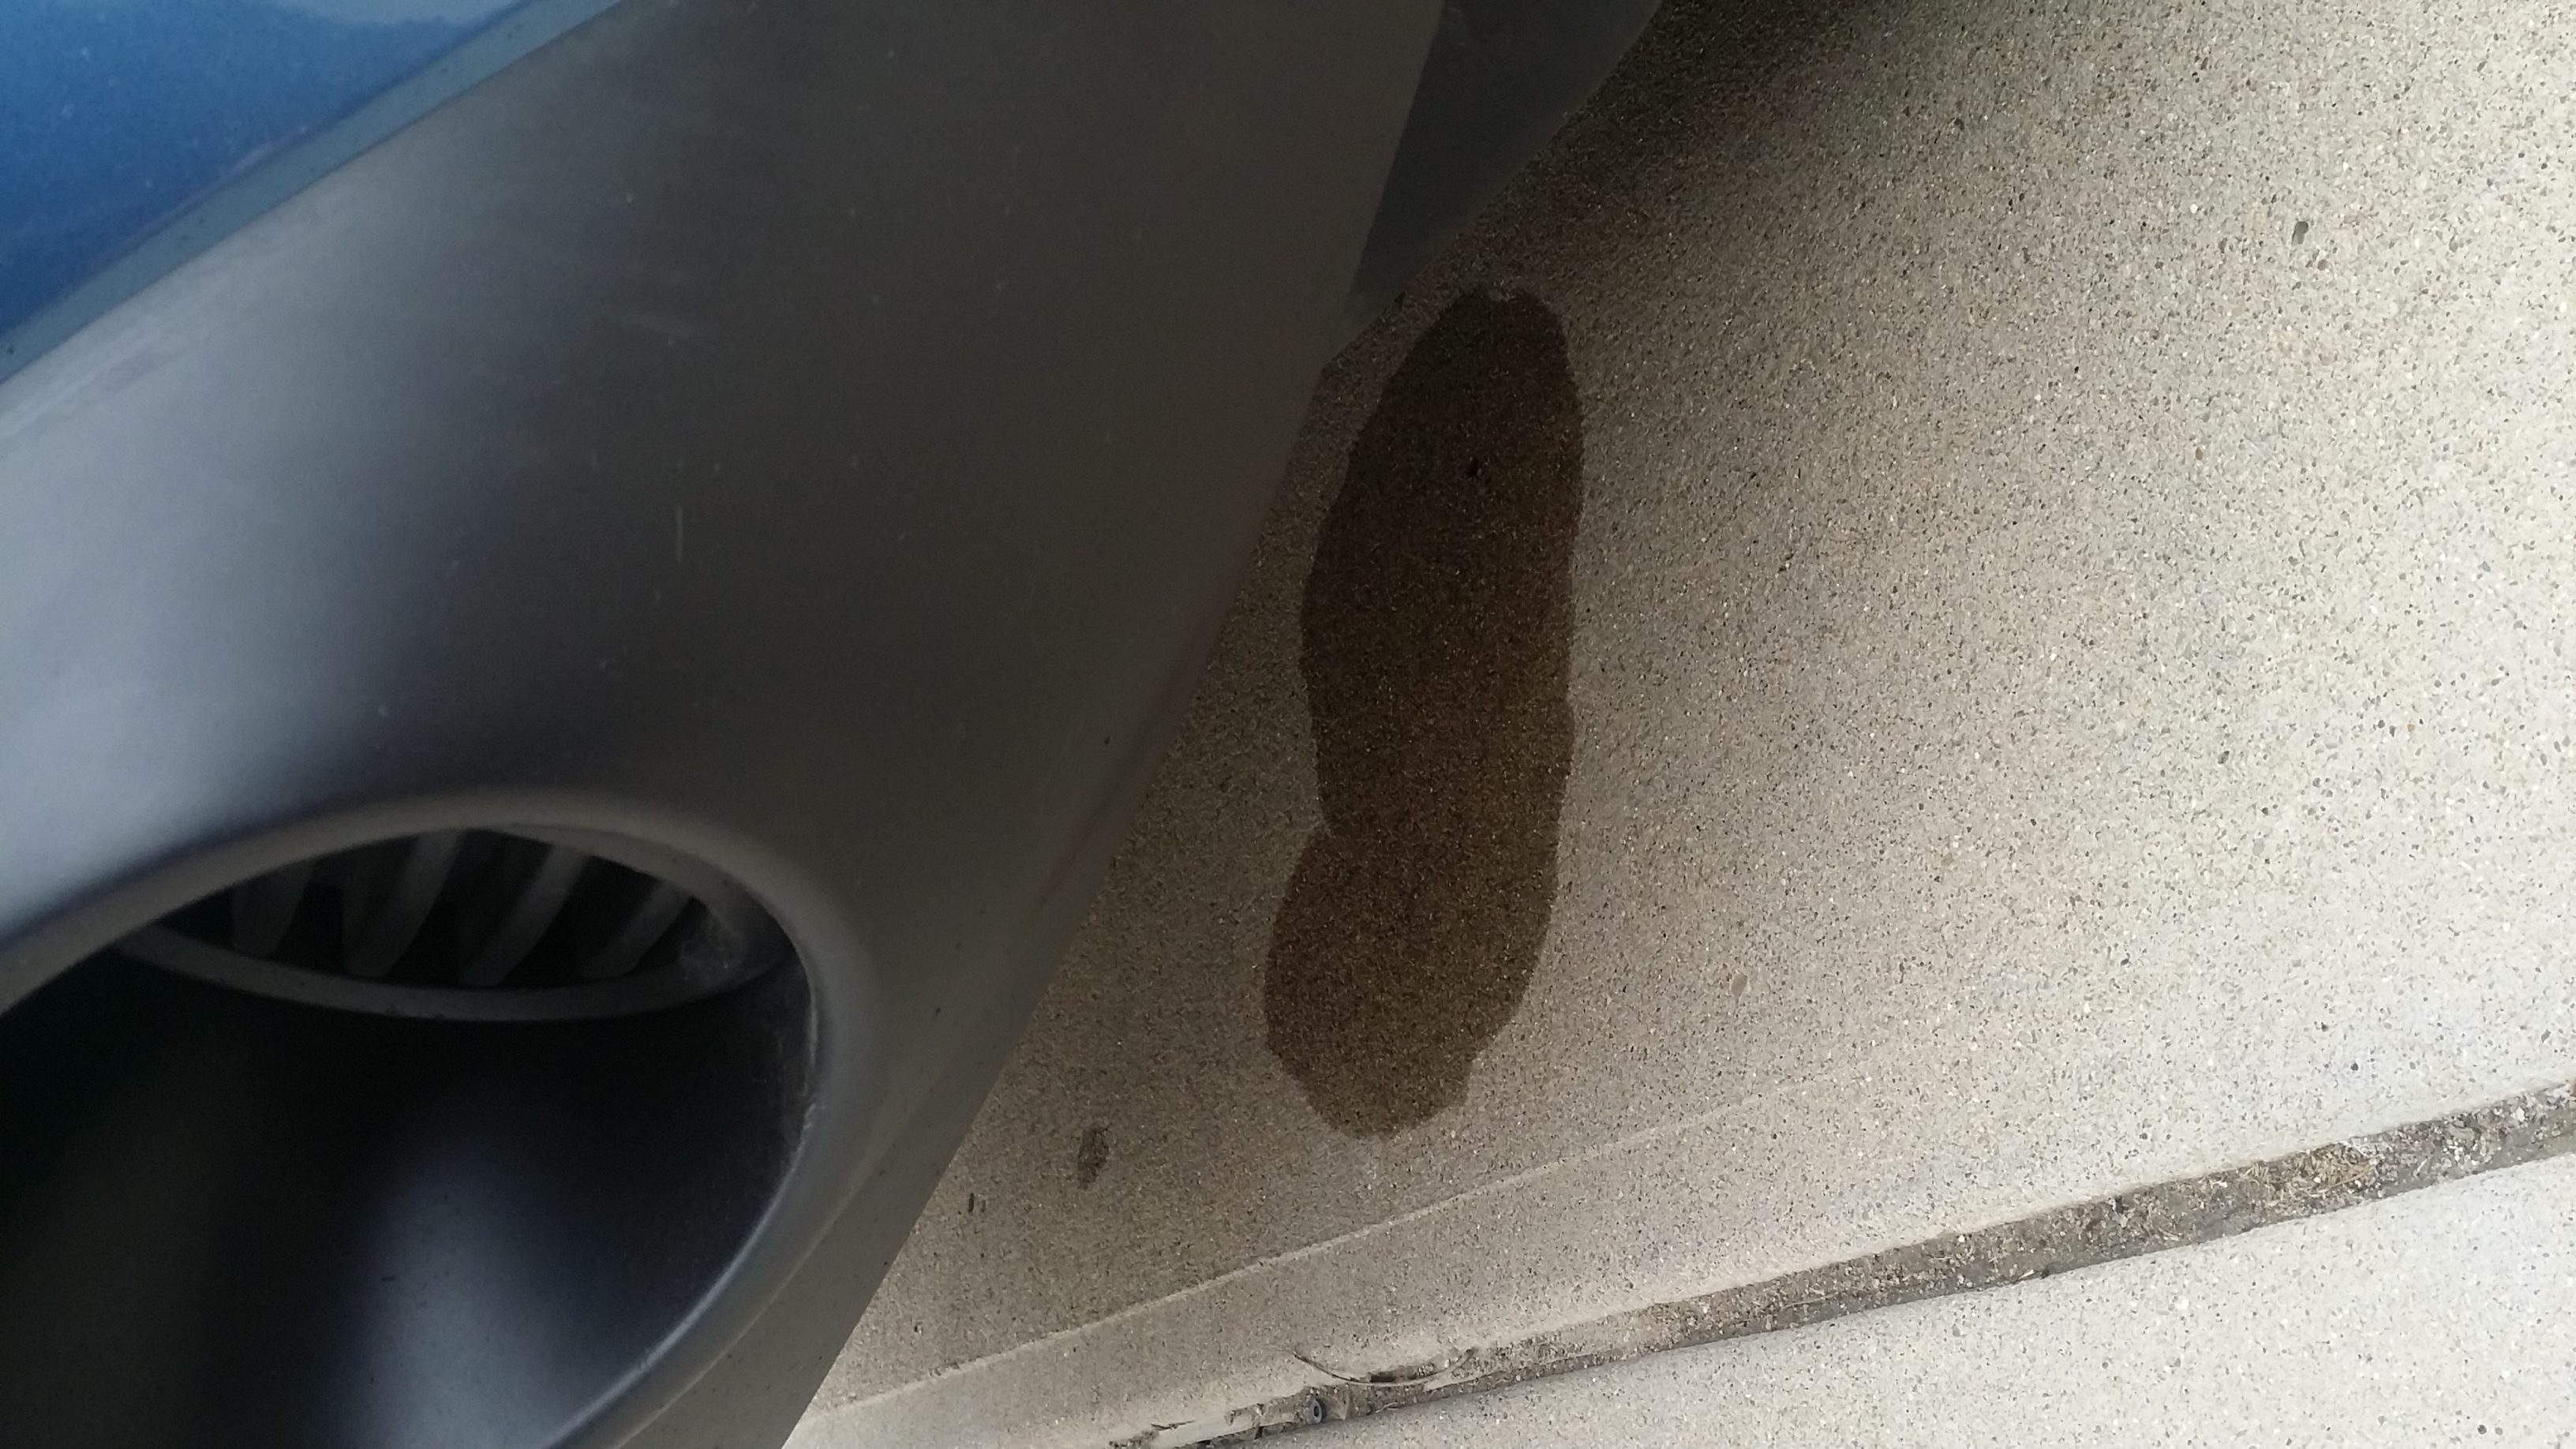 First day home antifreeze leaking on driveway